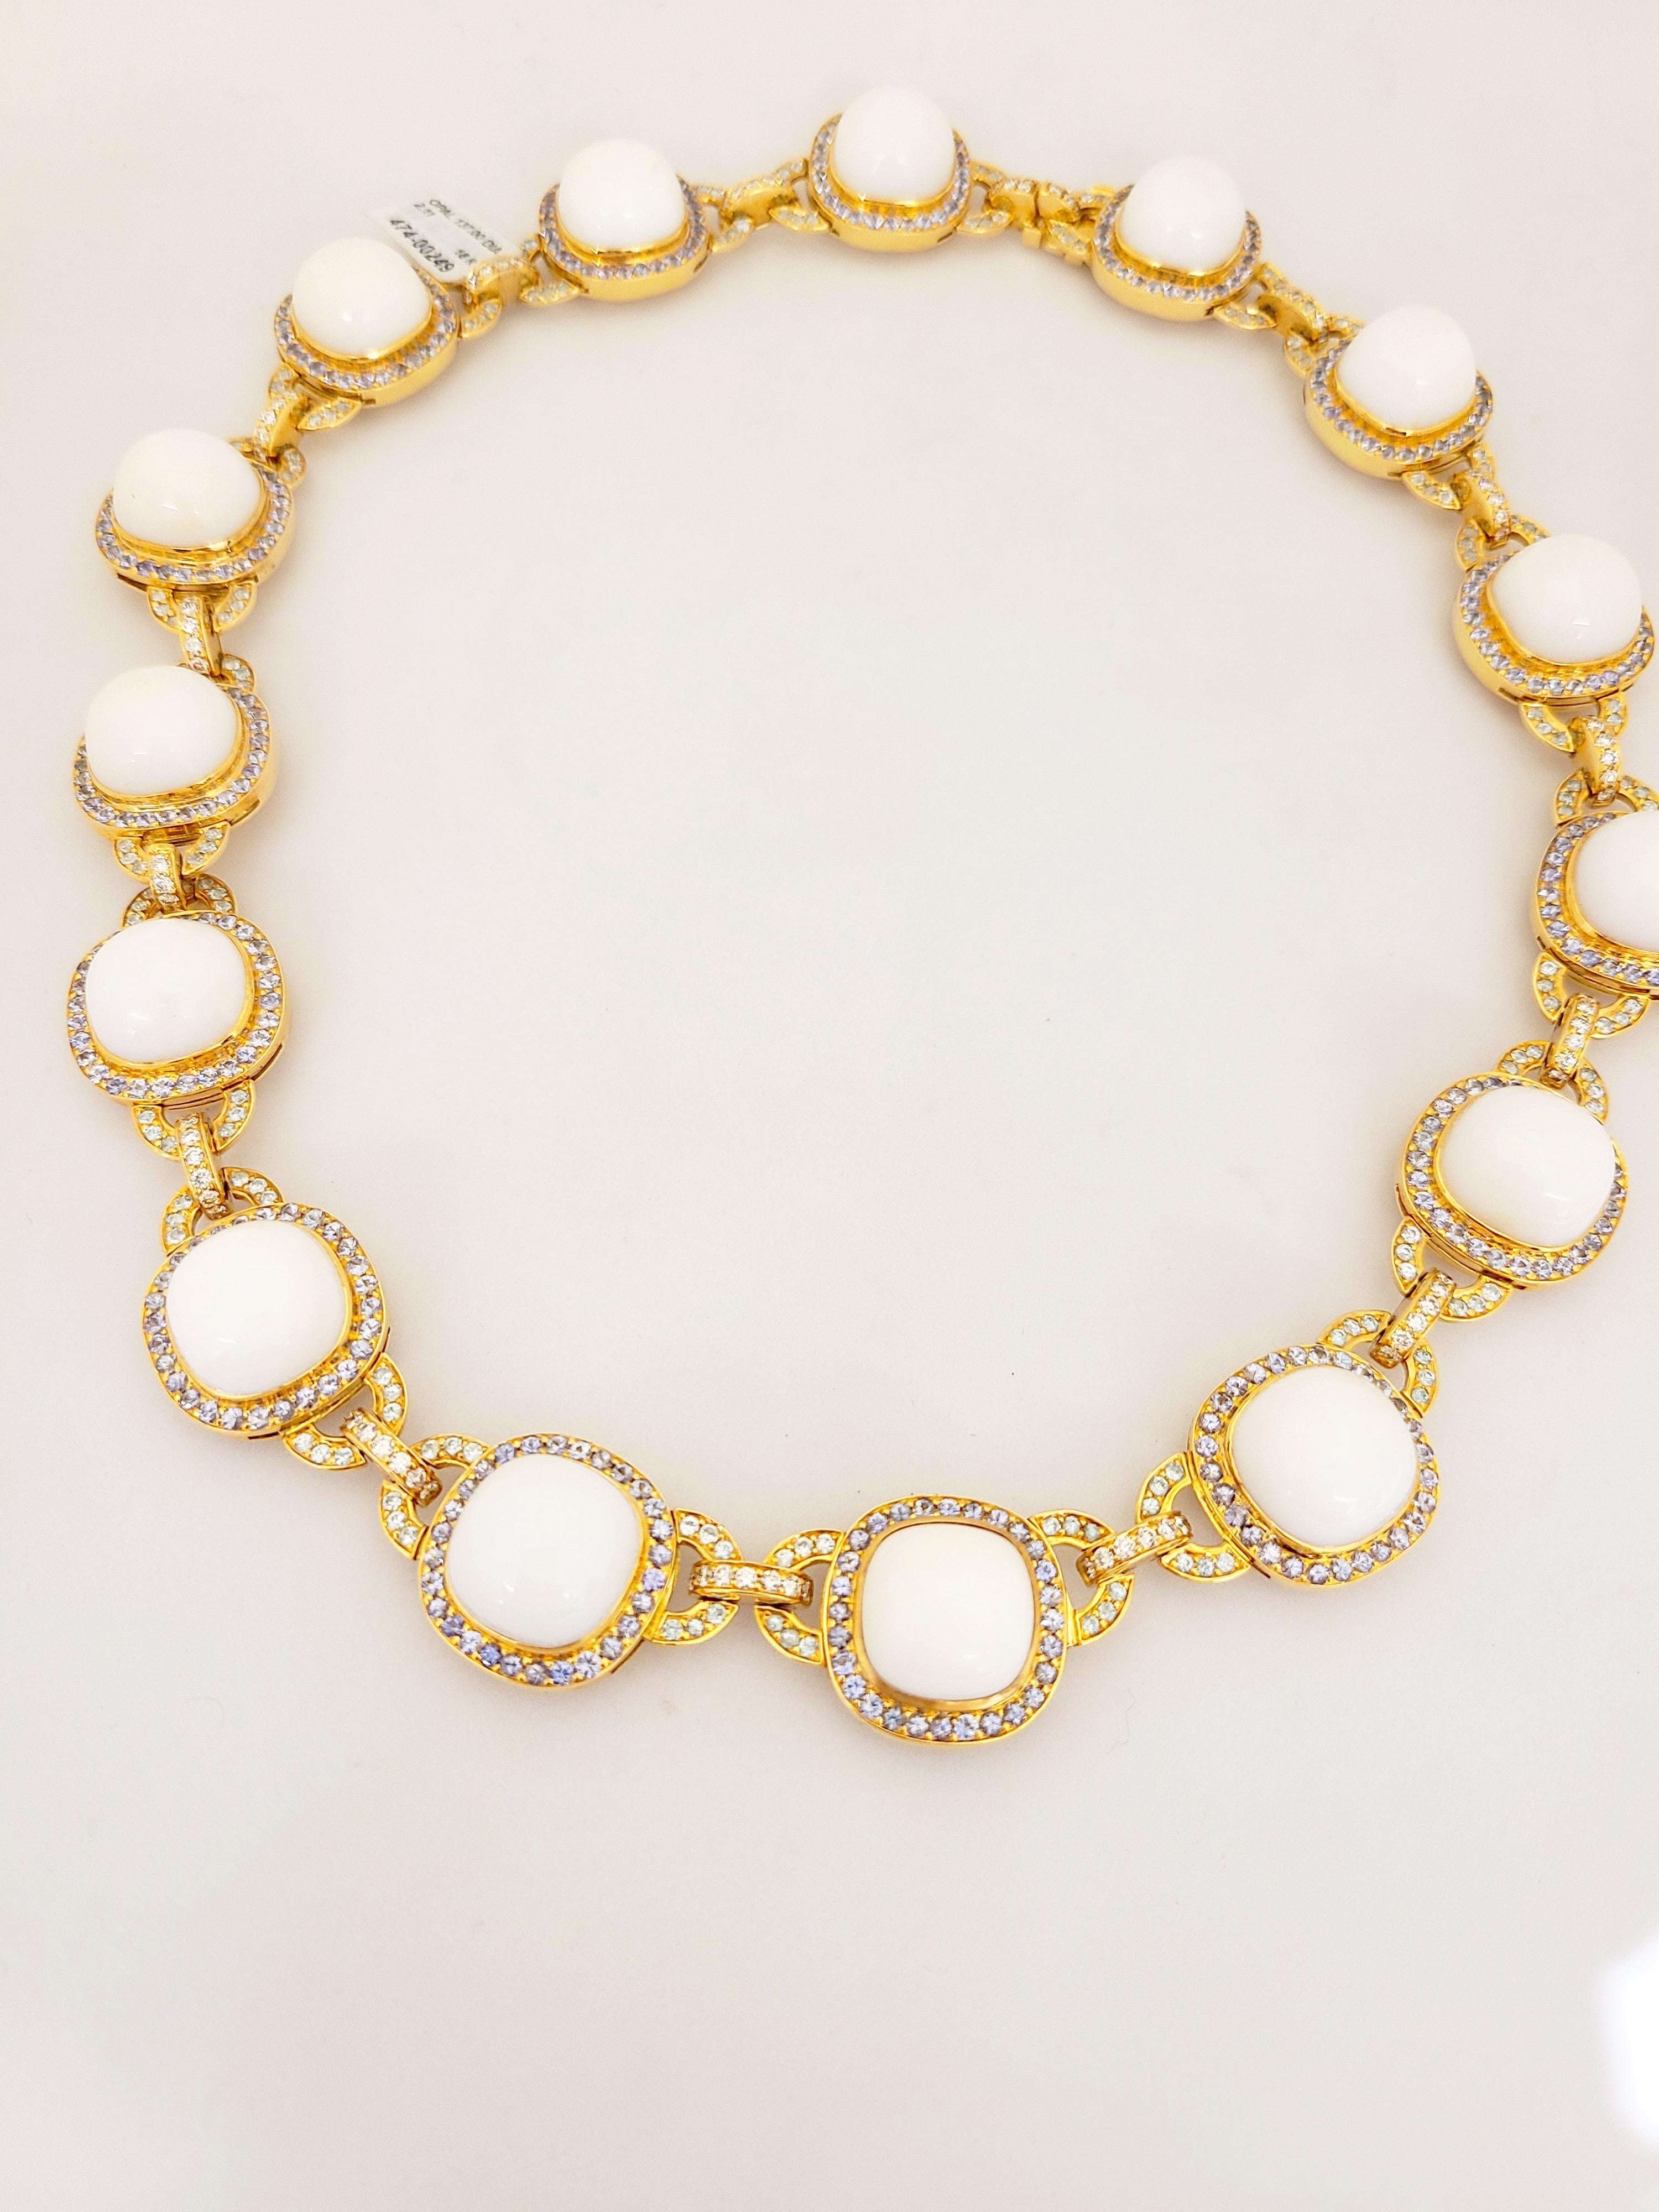 Known for their classic elegance and contemporary styling , Zorab has been creating magnificent jewelry for over 40 years. A family business now run by the second generation specializing in playful yet sophisticated pieces.
This elegant 18 karat